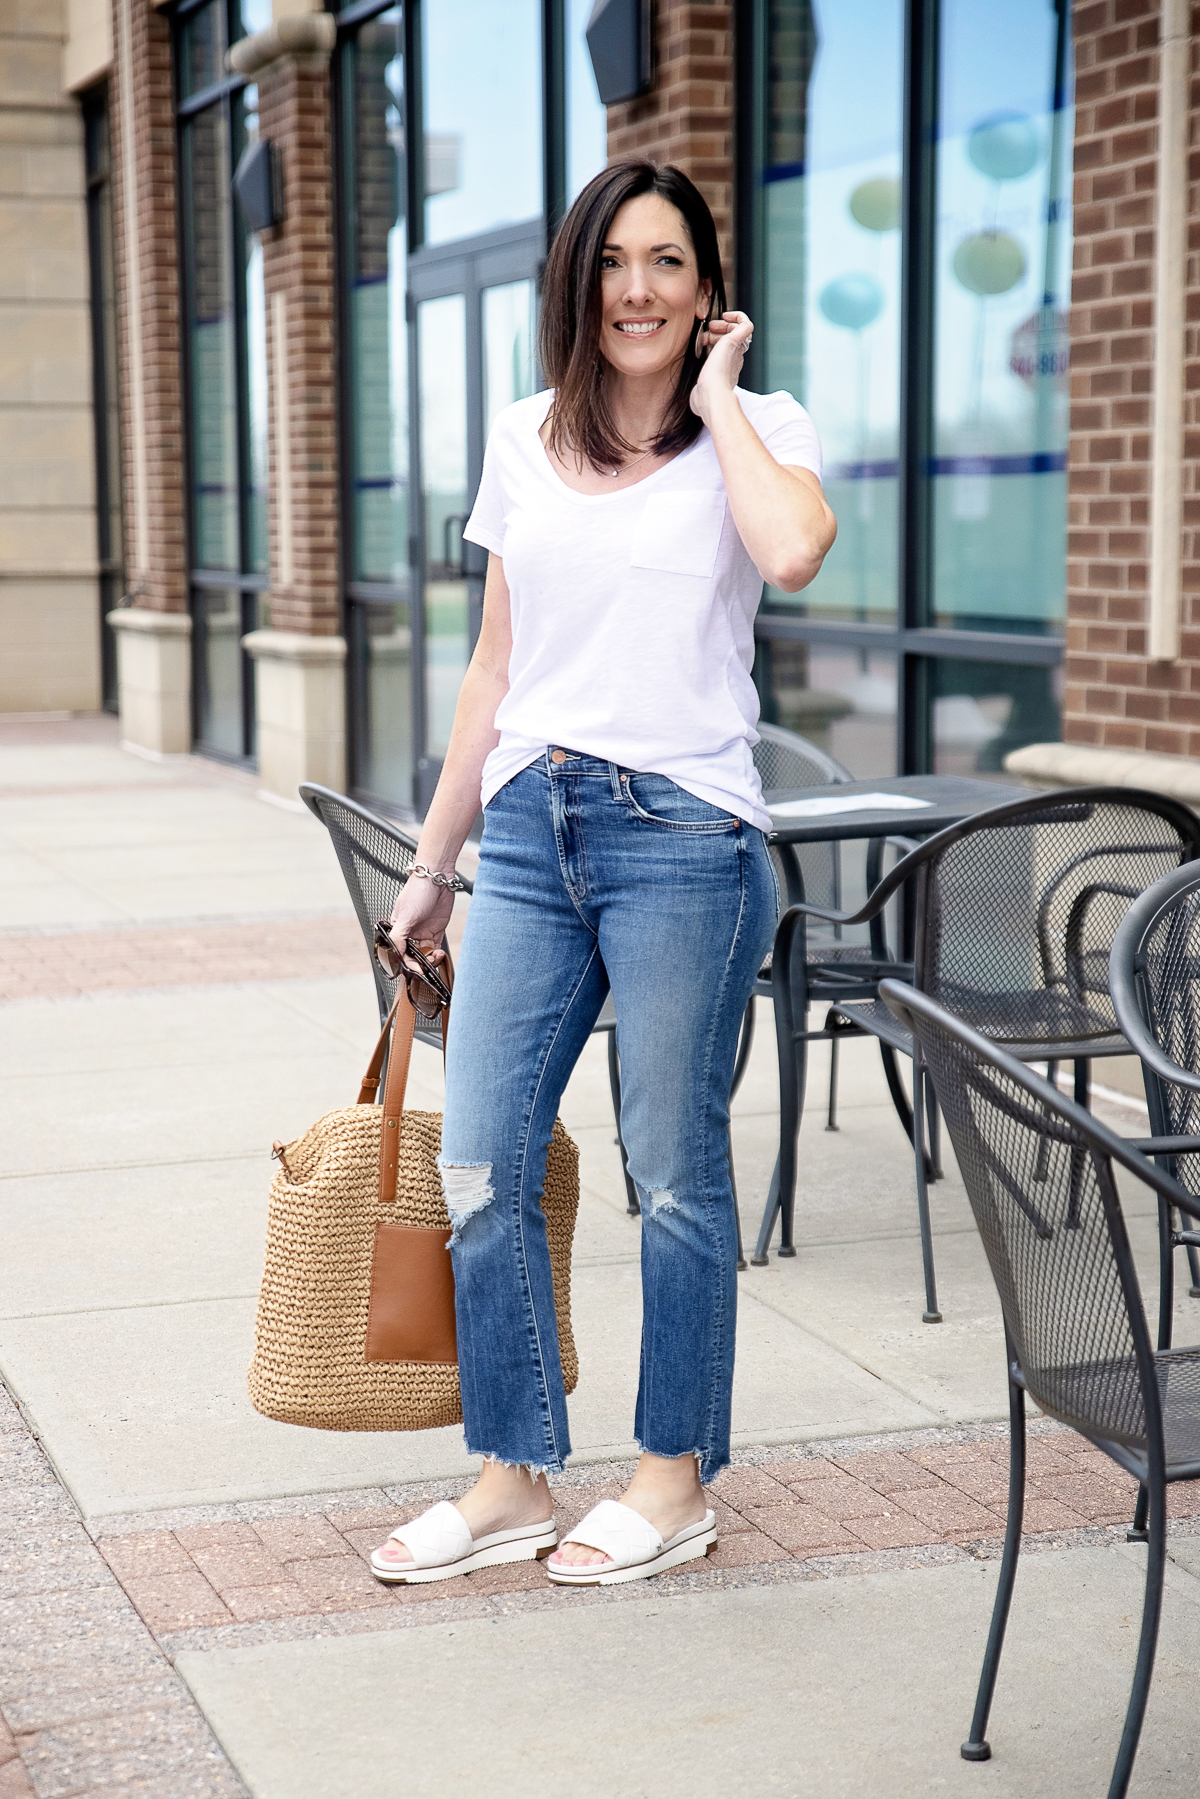 6 Tips for How to Be Stylish in Casual Outfits & Elevate Your